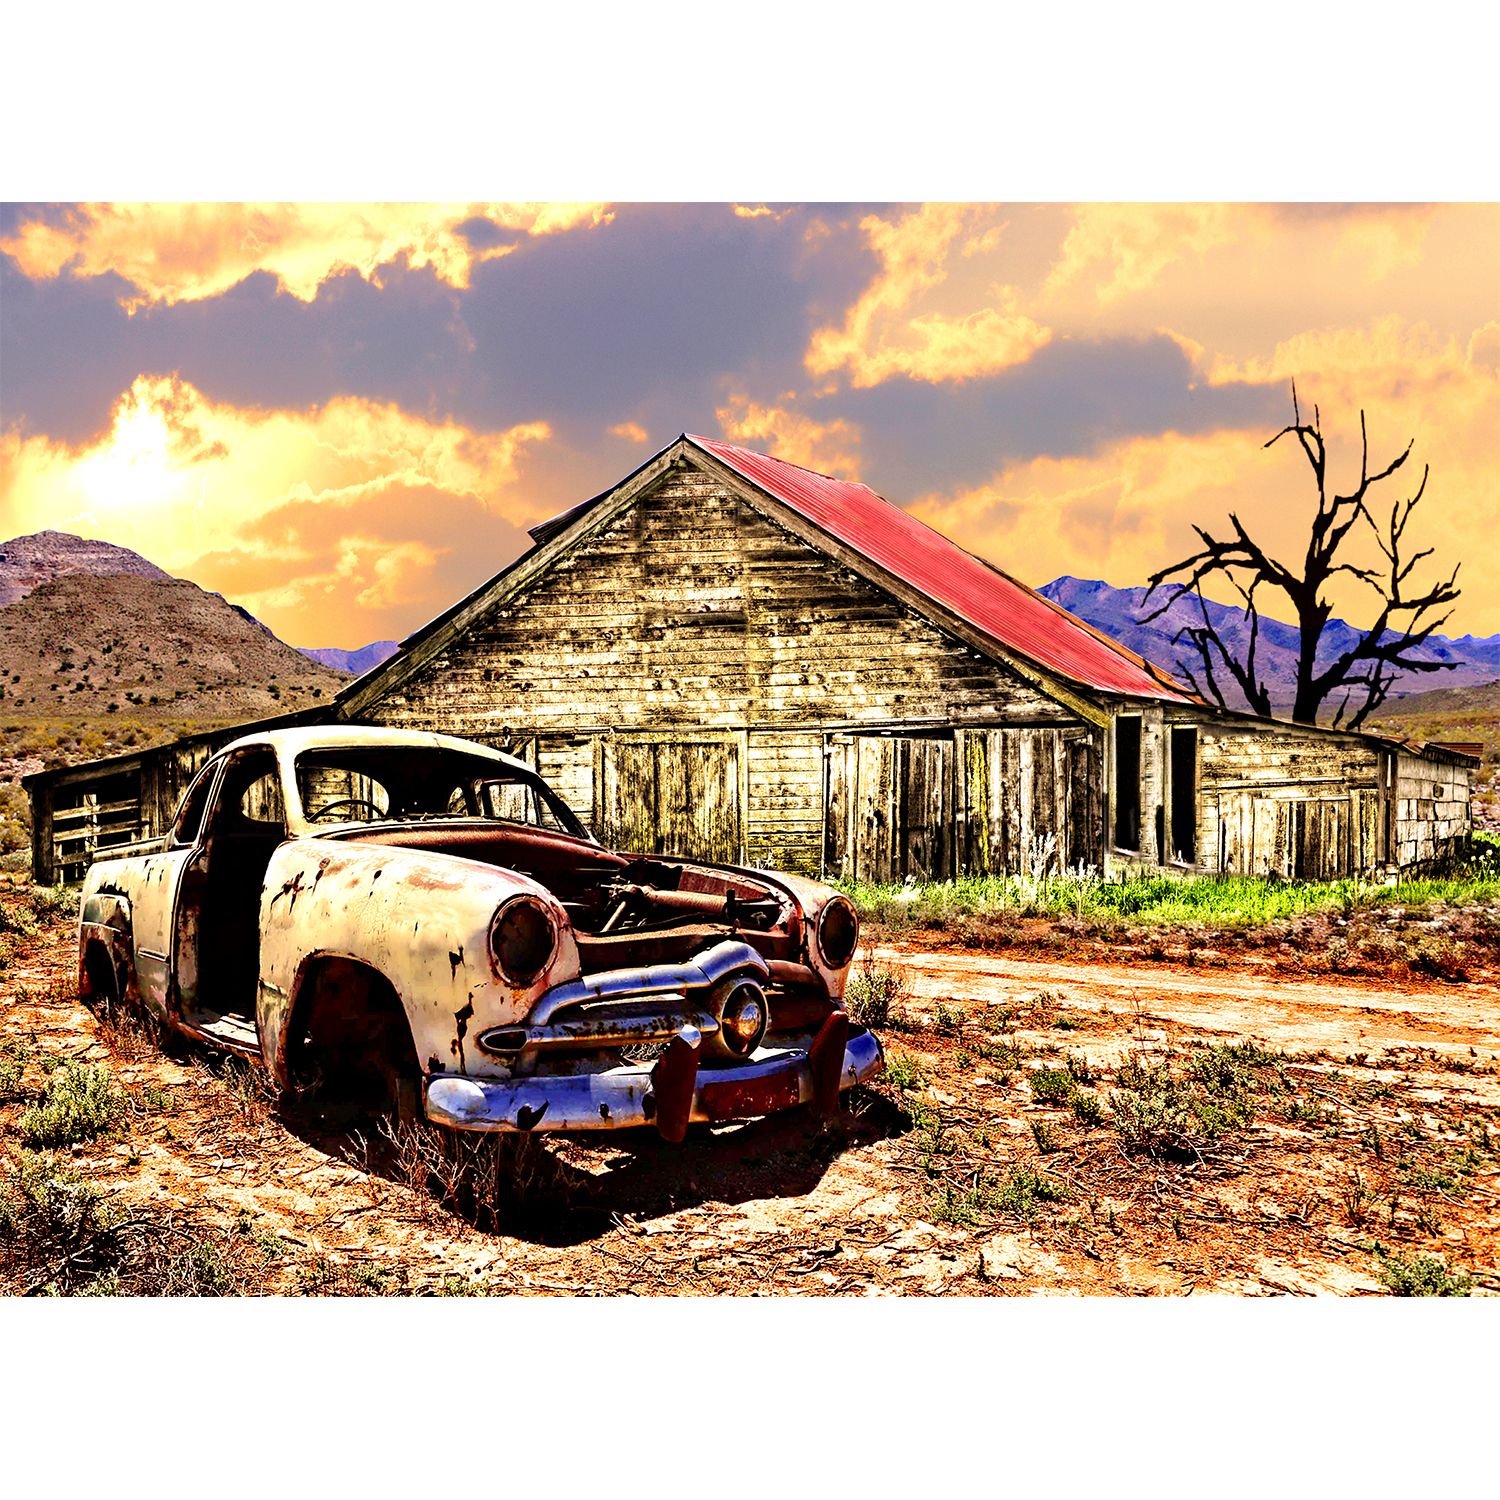 1500pc puzzle of old pickup truck and barn in karoo